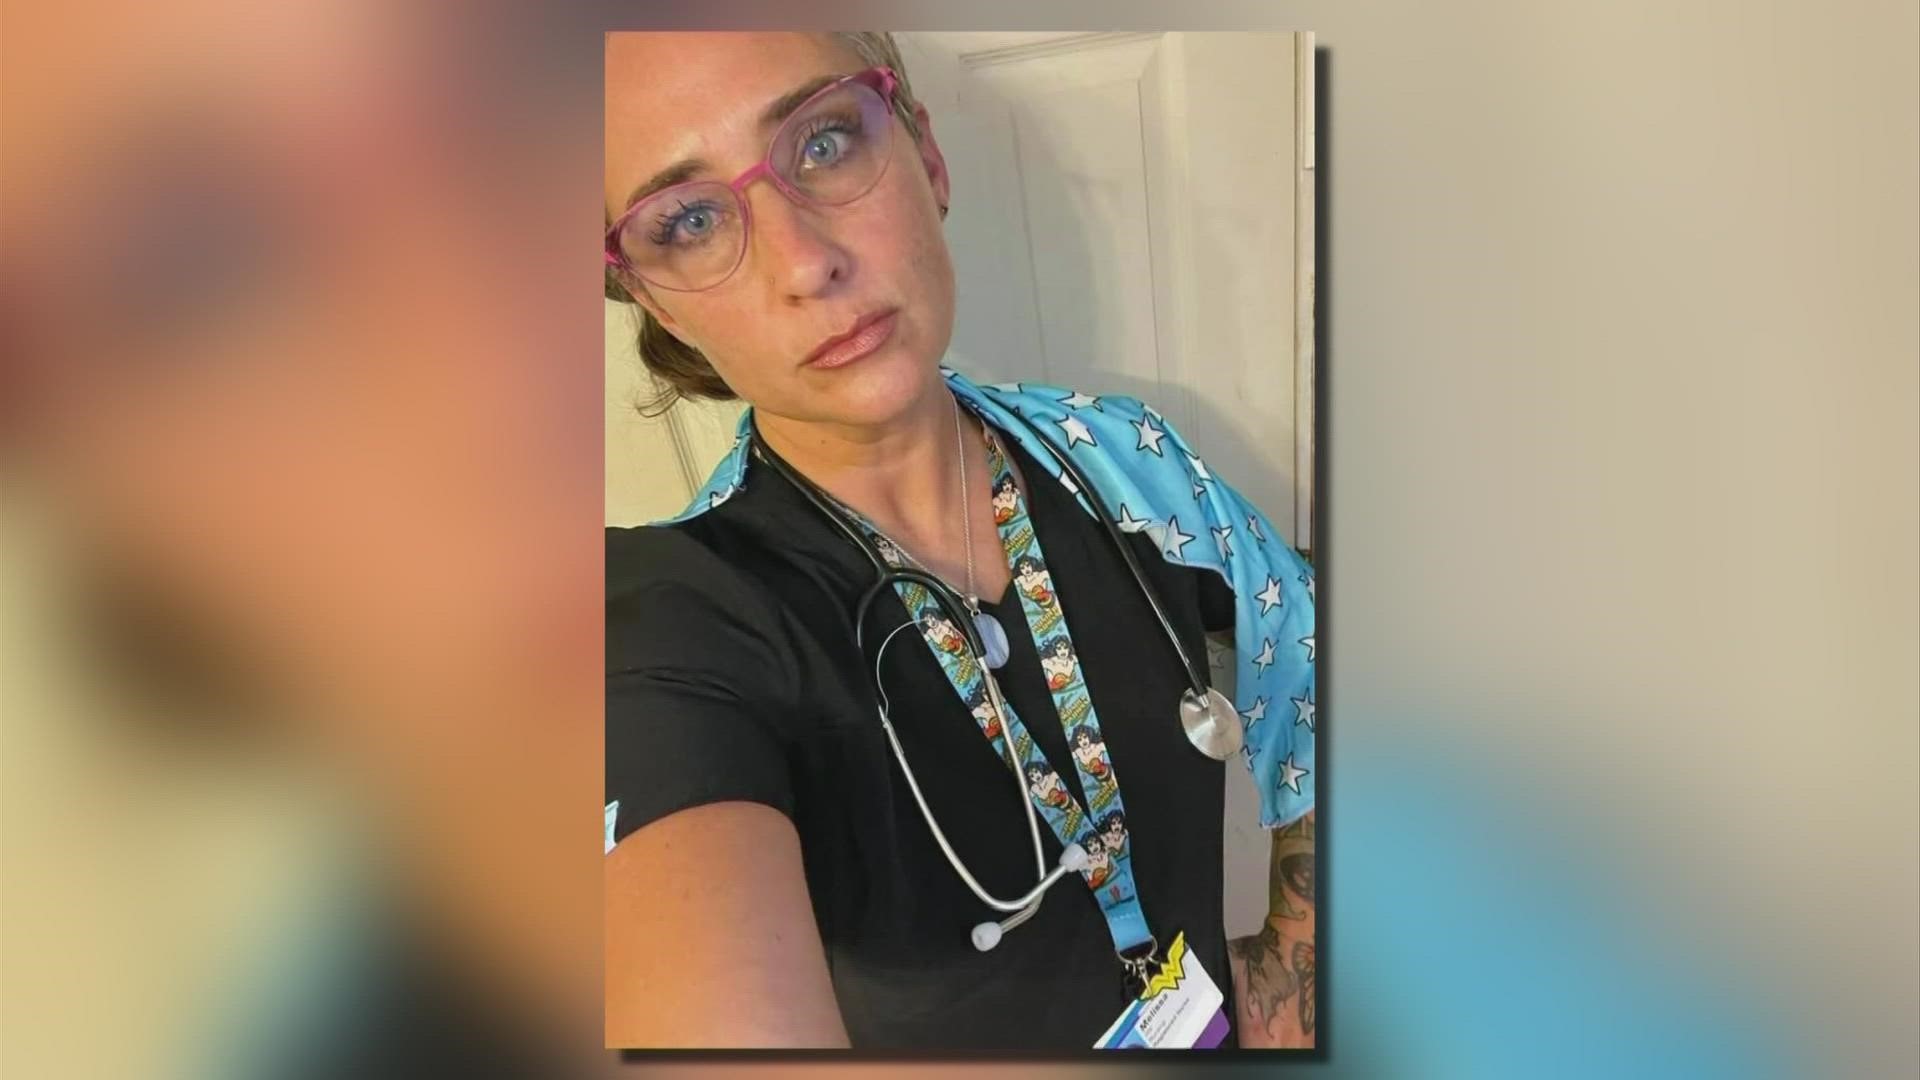 Melissa Rexroth is a registered nurse. Last year she lived on, what she calls, the “extremely scary” front lines of COVID-19.